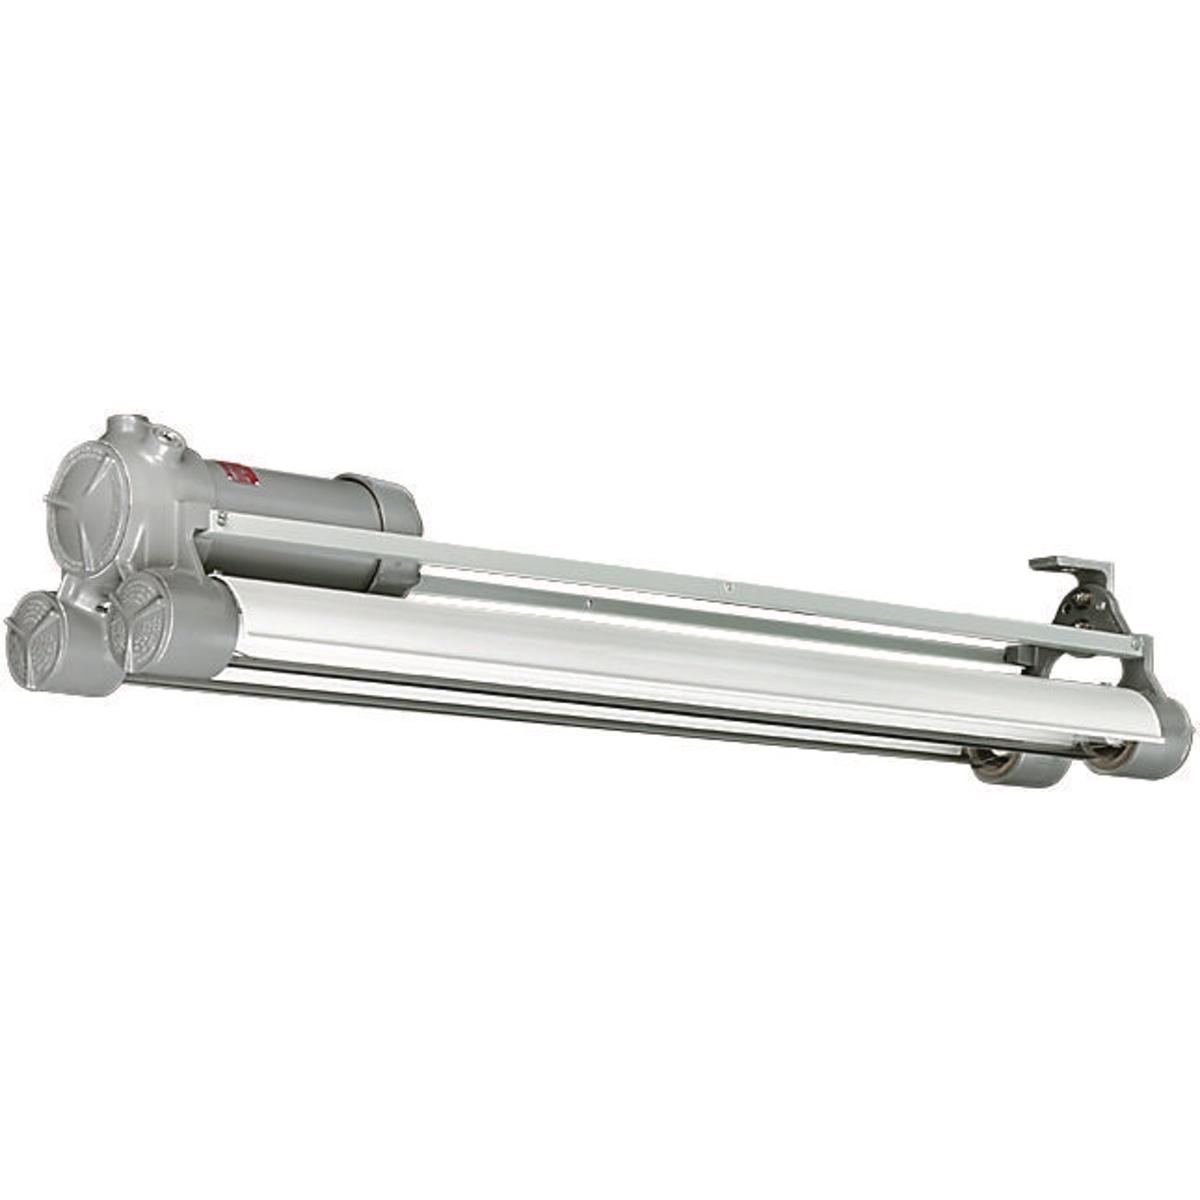 Hubbell HFX-800-12 HFX 60W Fluorescent 120V 2 Lamp  ; UL Listed and labeled for use inside paint spray booths and rooms ; 2’ nominal compact models facilitate use in areas too small for nominal 4’ models, or where the light must be confined ; Standard ballast is 120-277V at